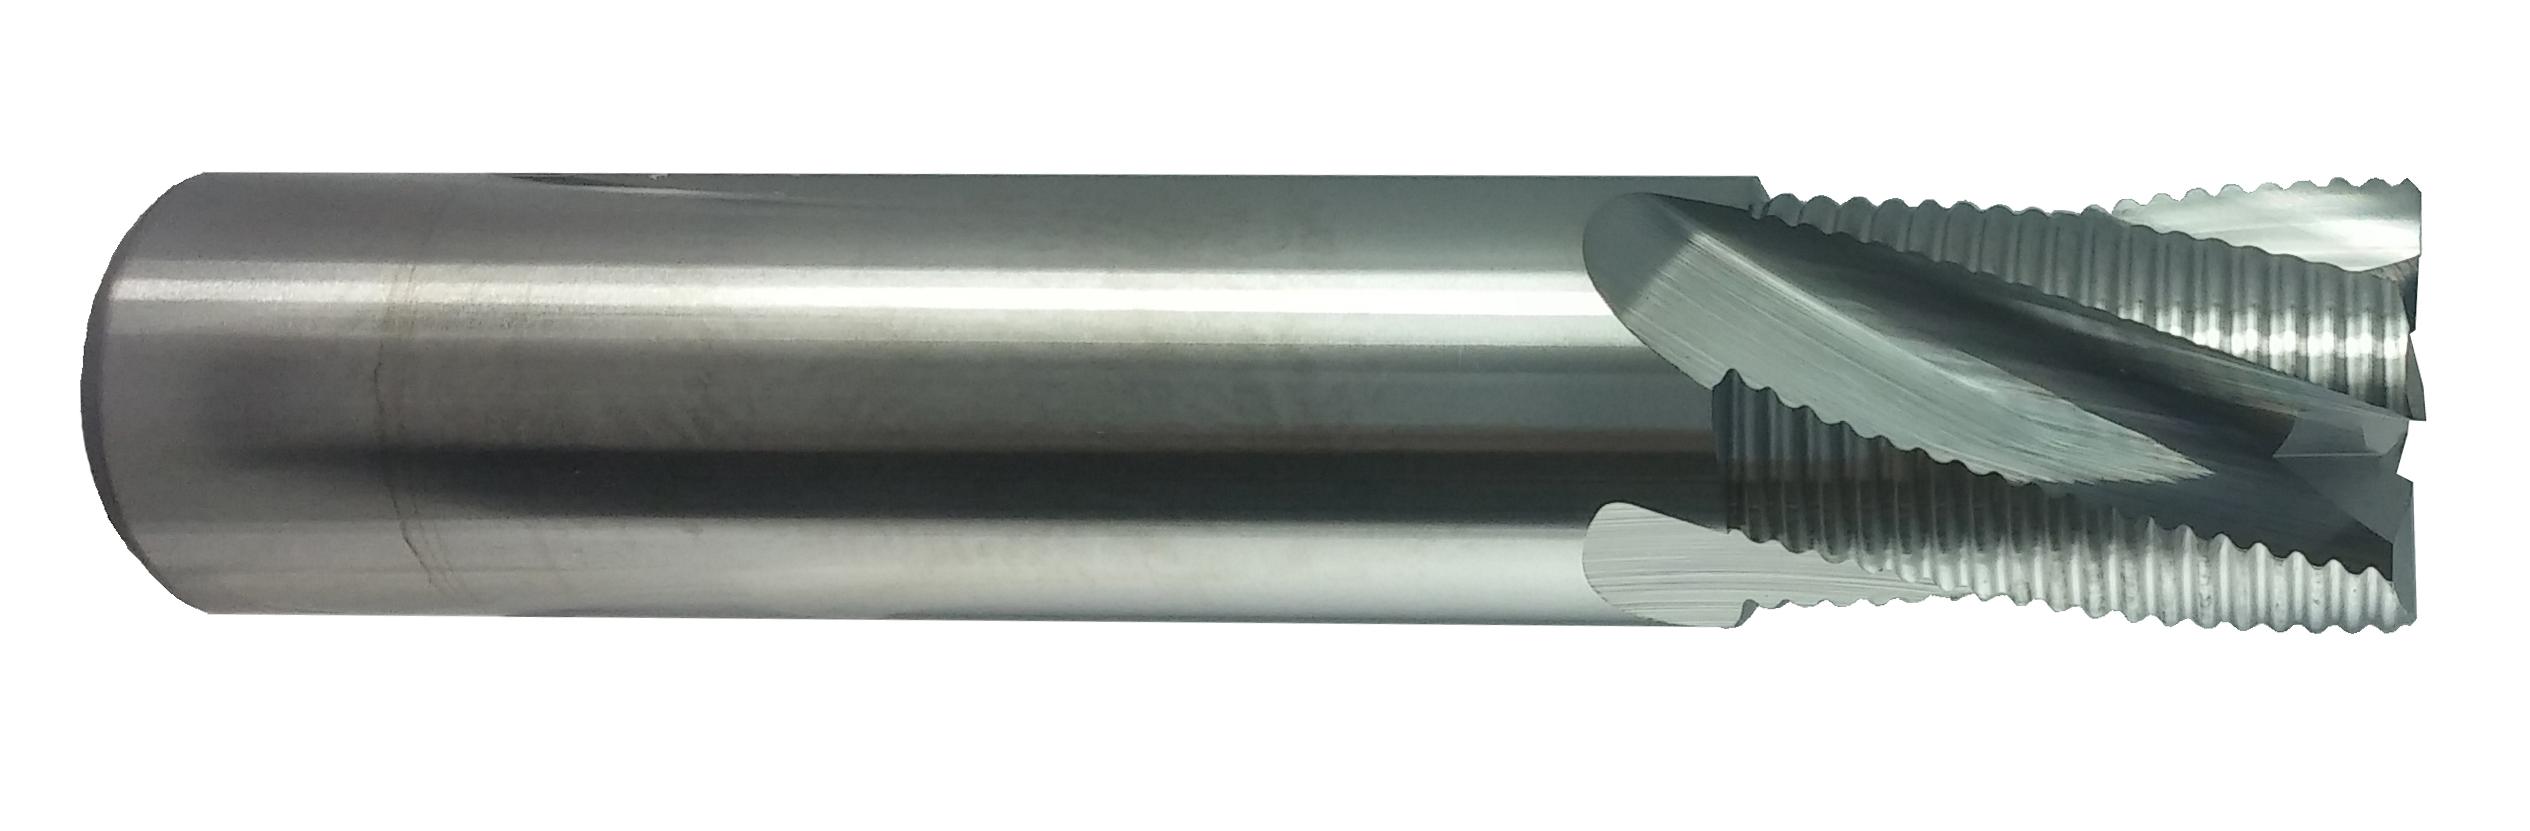 5 Overall Length 9/16 Mill Diameter 5/8 Shank Diameter F&D Tool Company 17868-FF220 Three Flute End Mill 1.375 Flute Length Double End High Speed Steel 